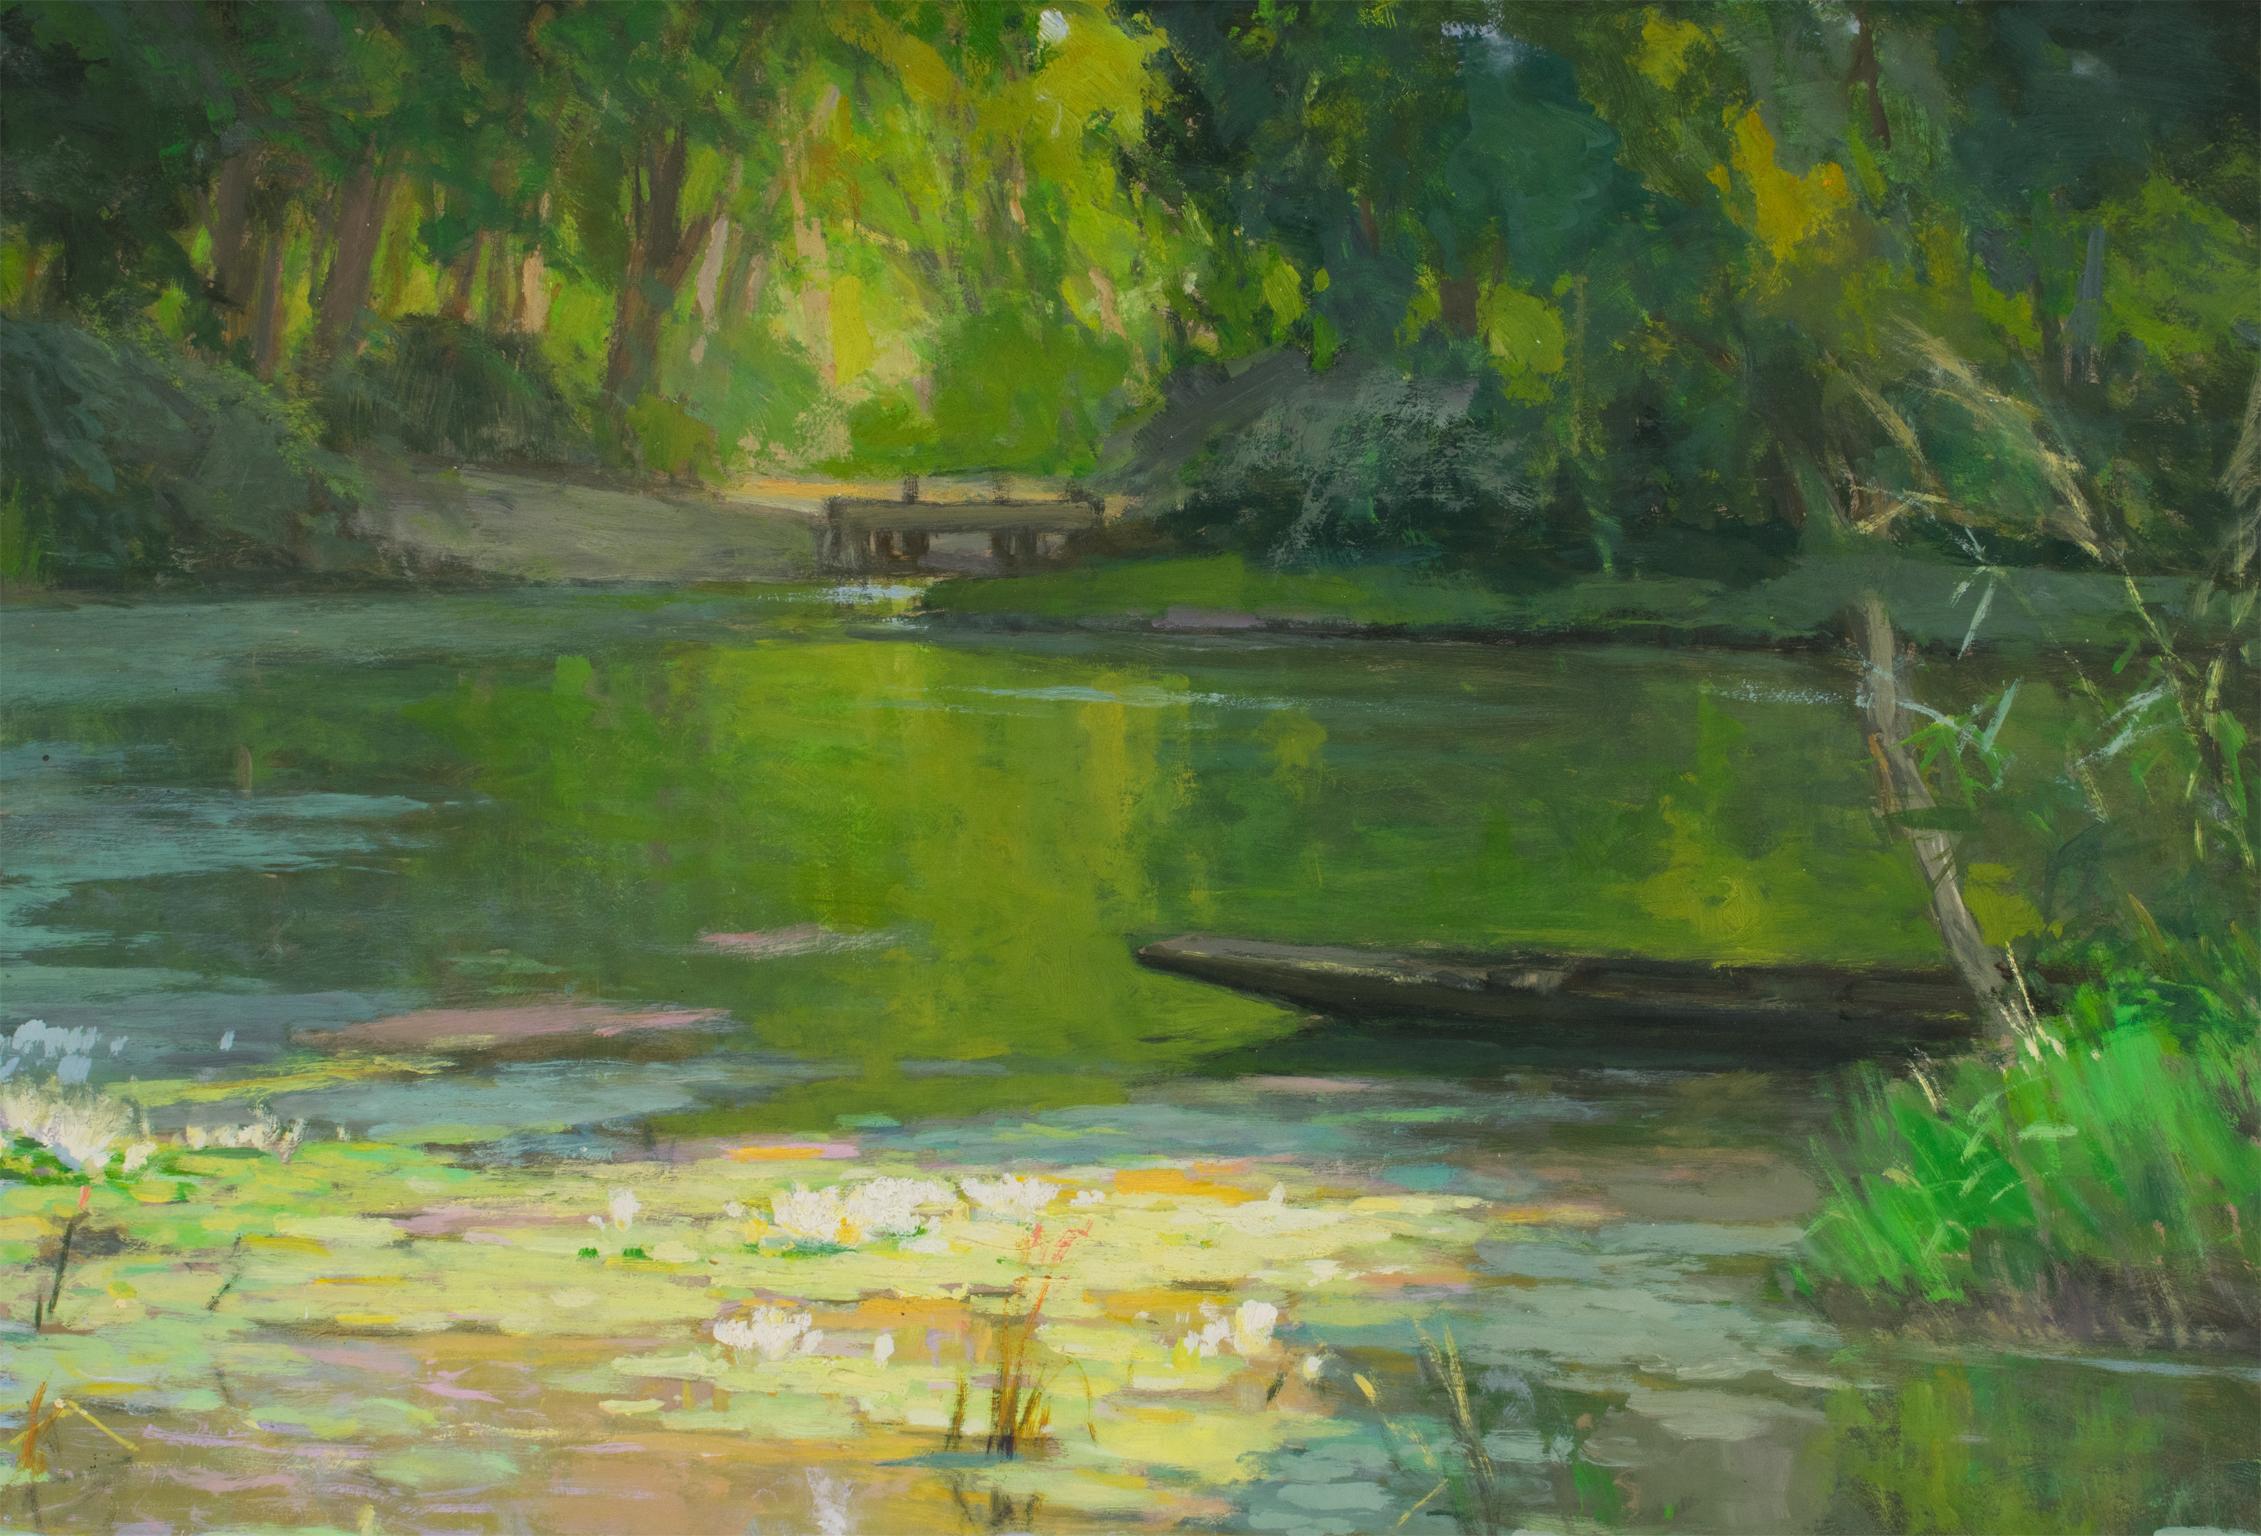 The Water Lilies, Oil on Masonite Board Painting by Pierre Laurent Baeschlin 10